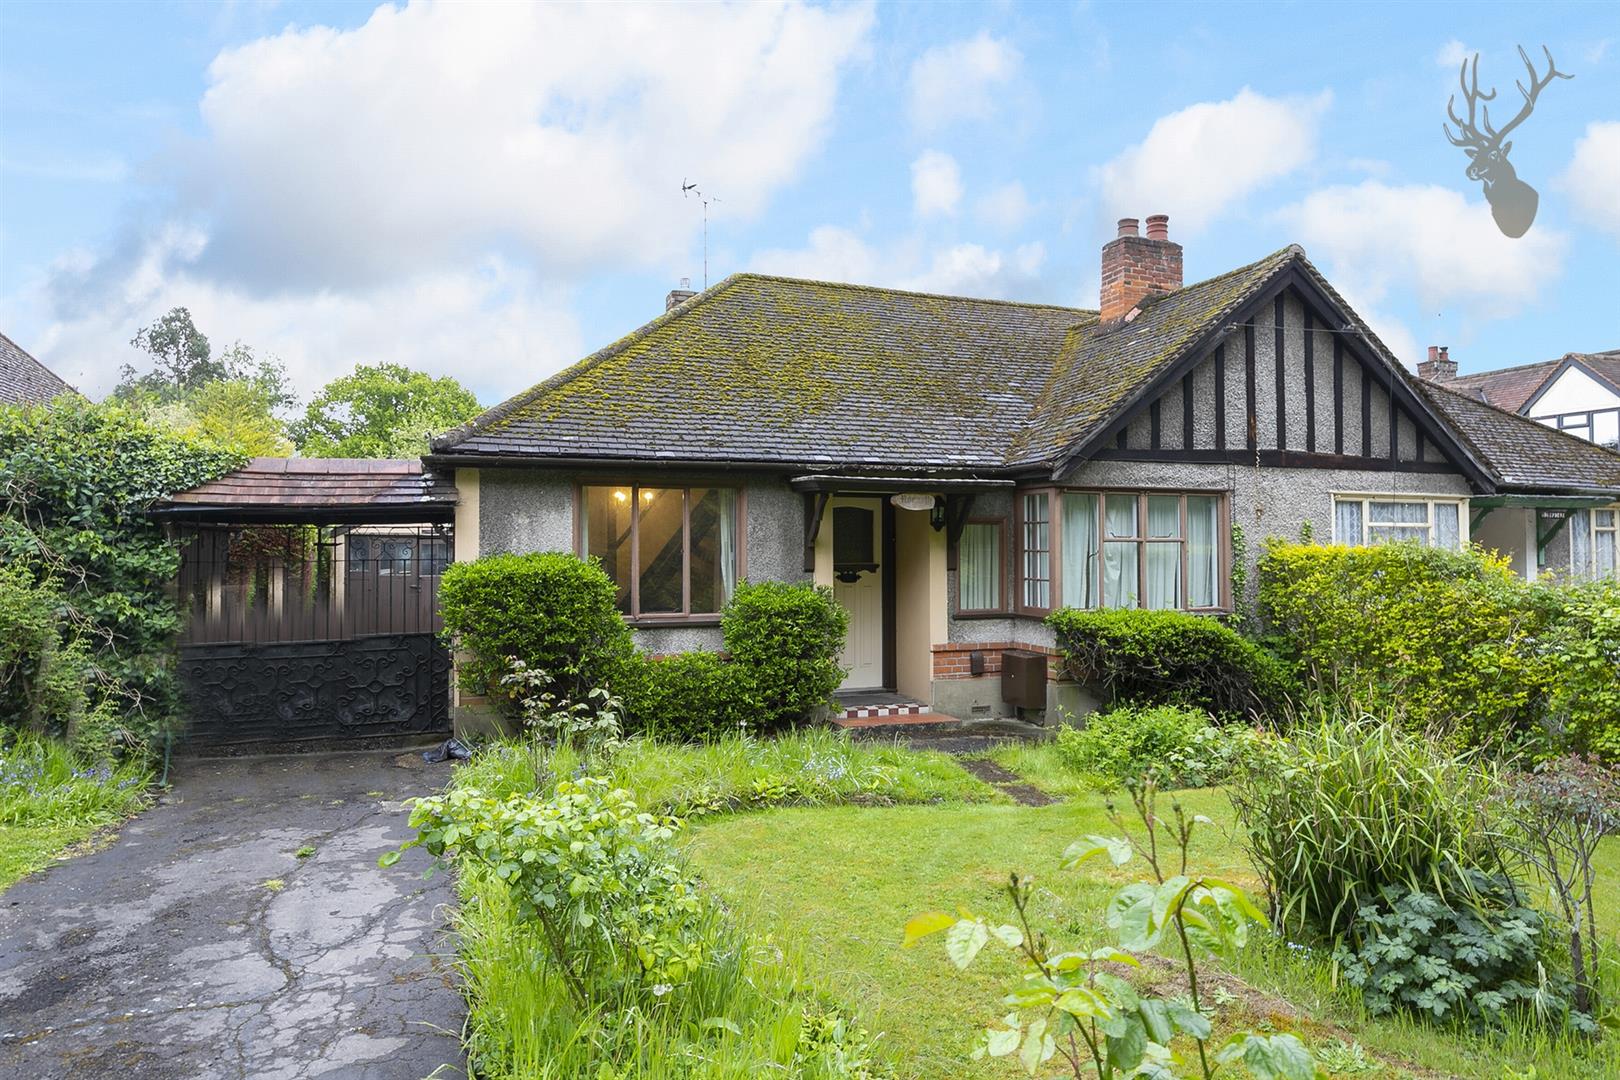 Similar Property: Bungalow in Theydon Bois